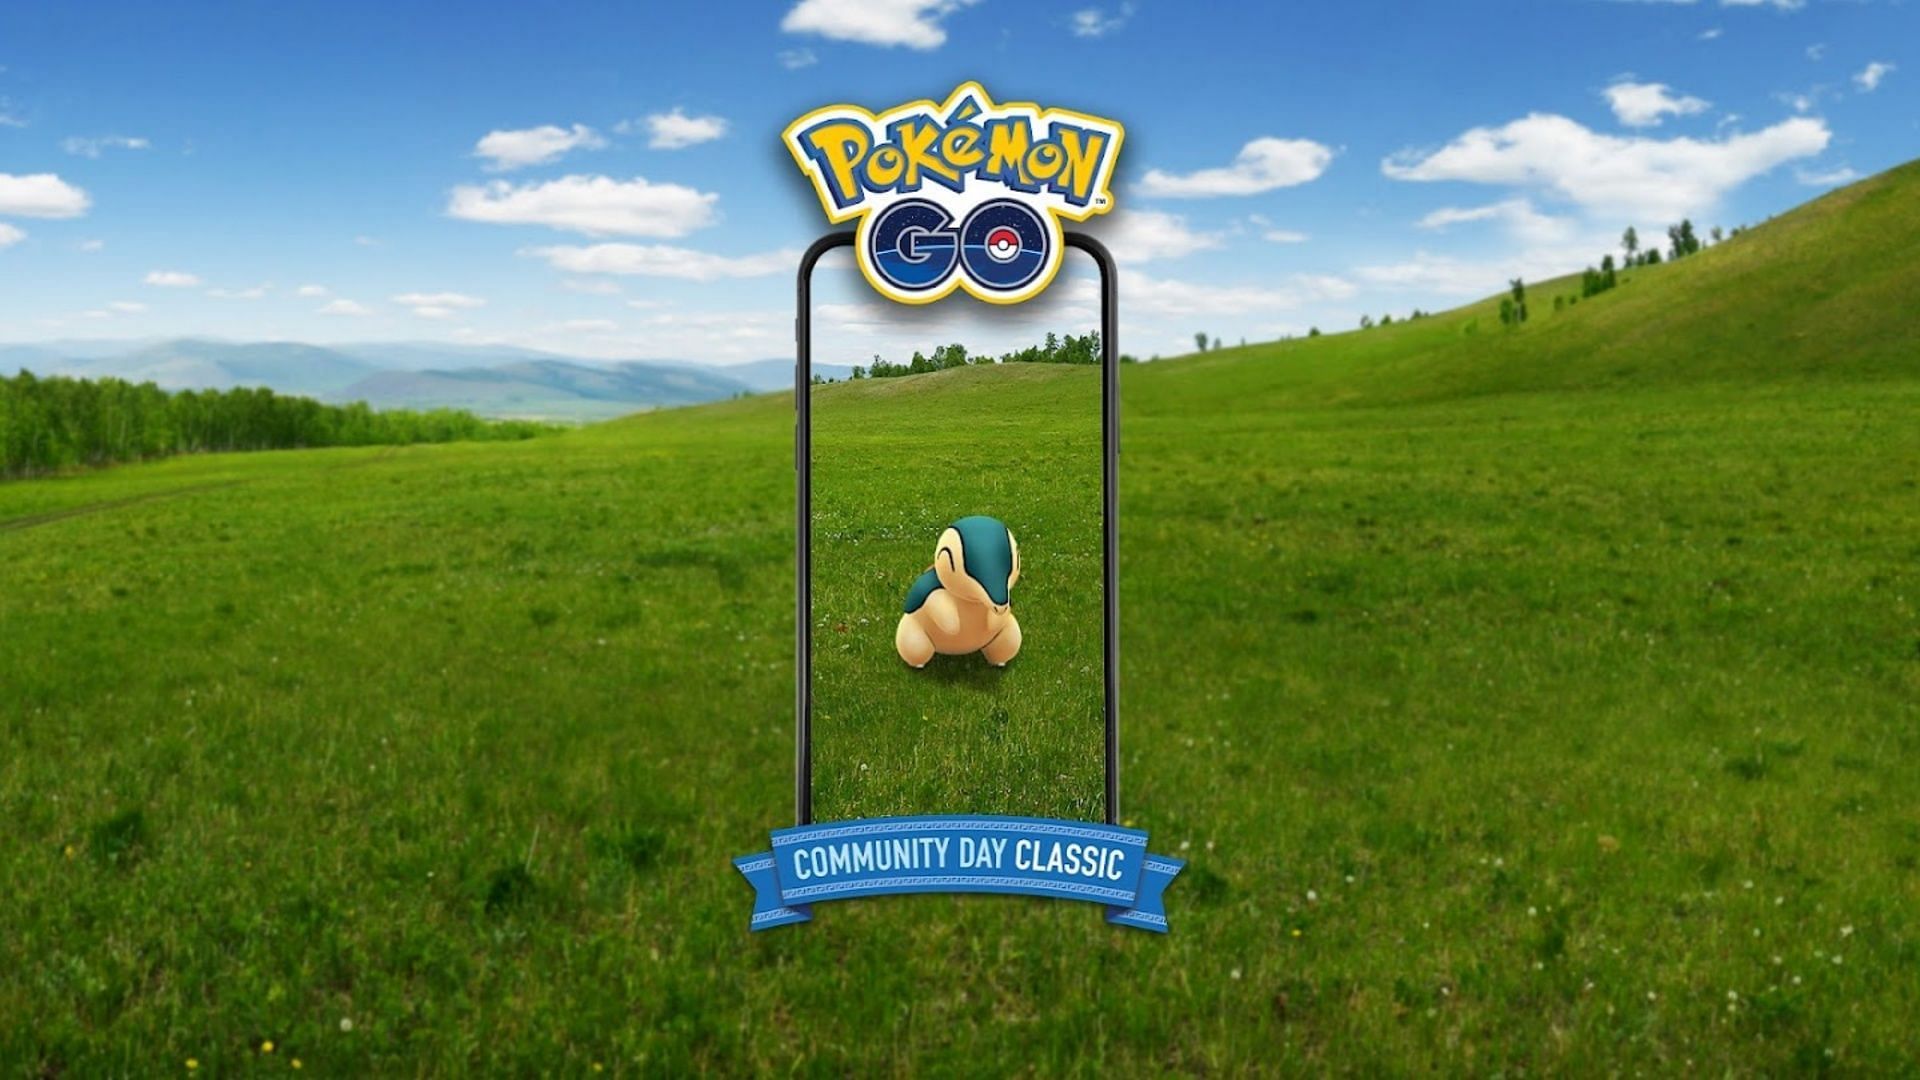 Pokemon GO Cyndaquil Community Day Classic: Schedule, event bonuses, and more